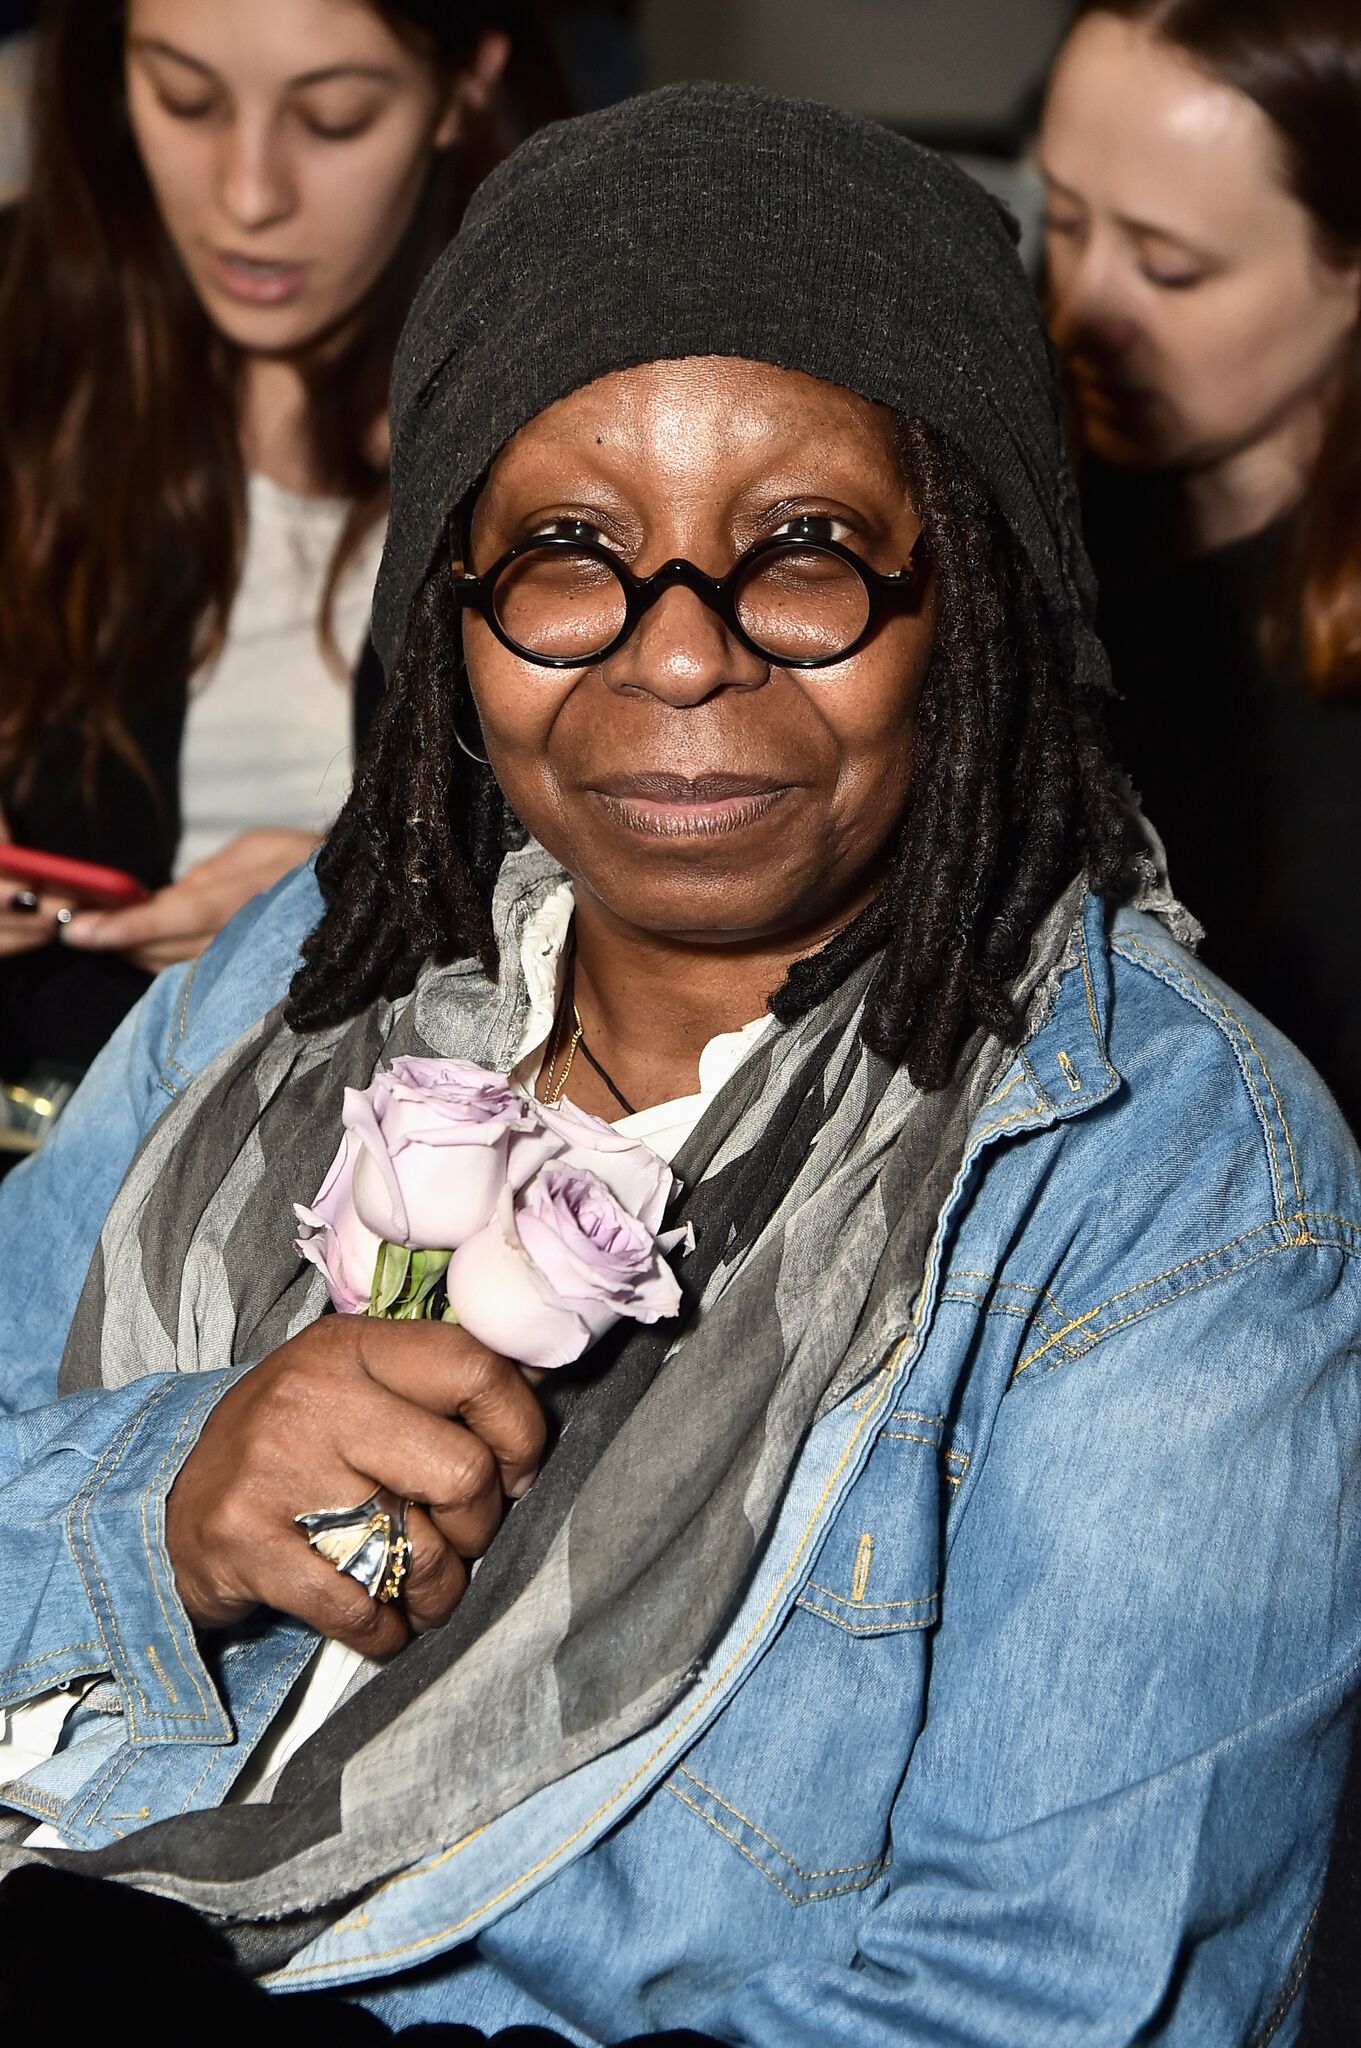 Whoopi Goldberg at Brock Collection during New York Fashion Week | Getty Images